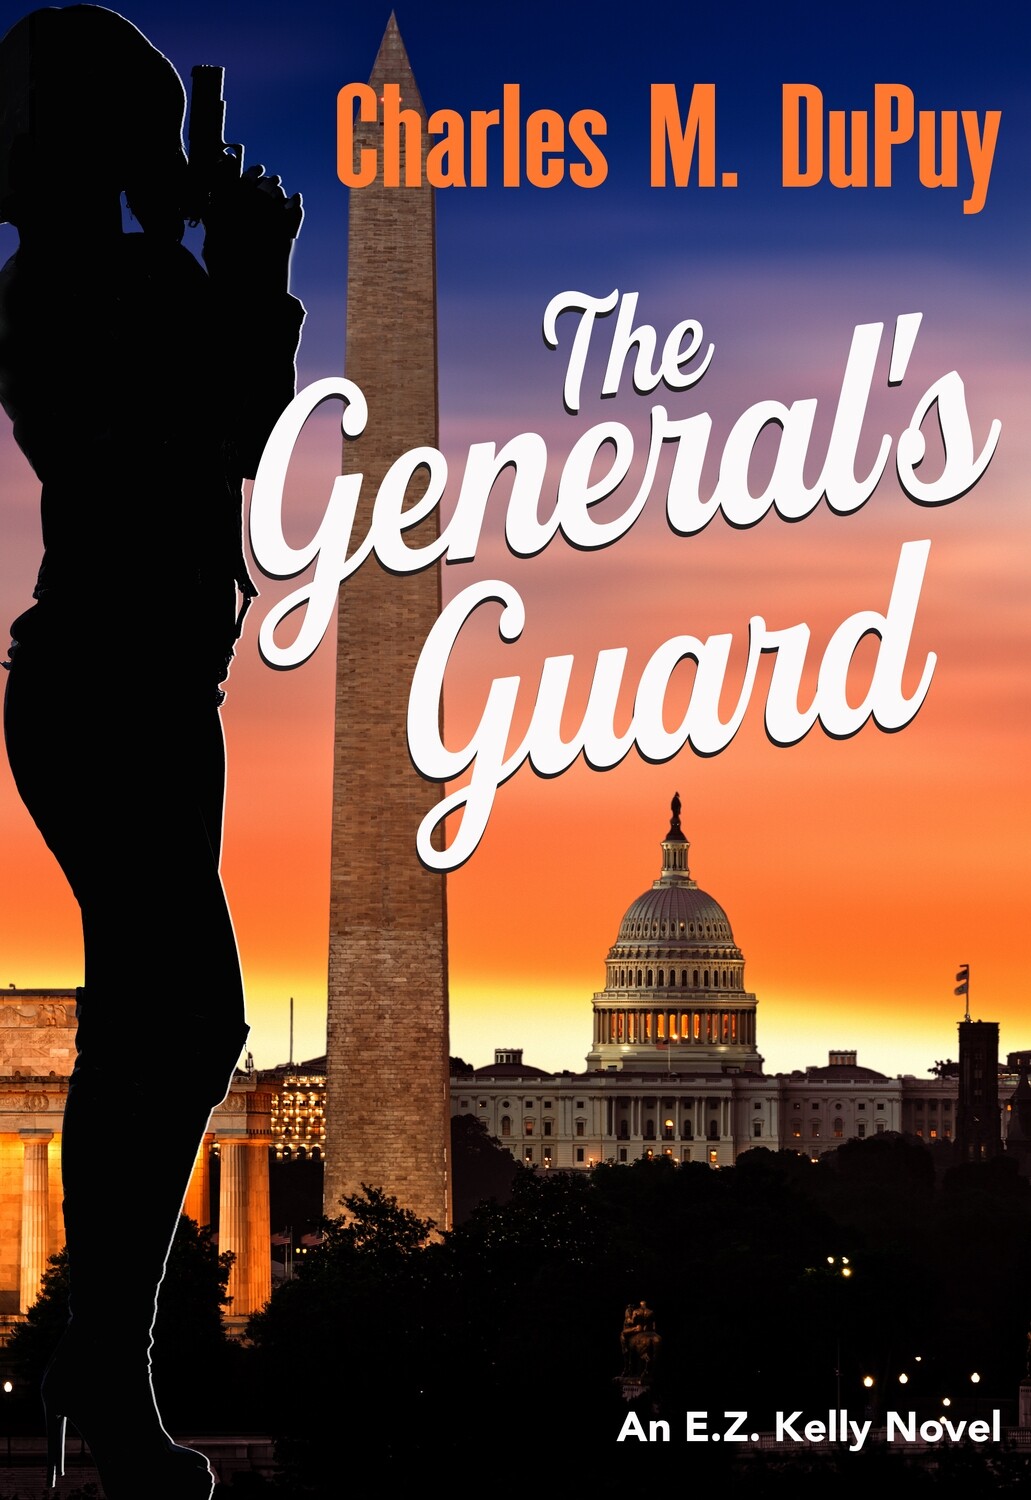 PRE-ORDER: The General's Guard by Charles M. DuPuy